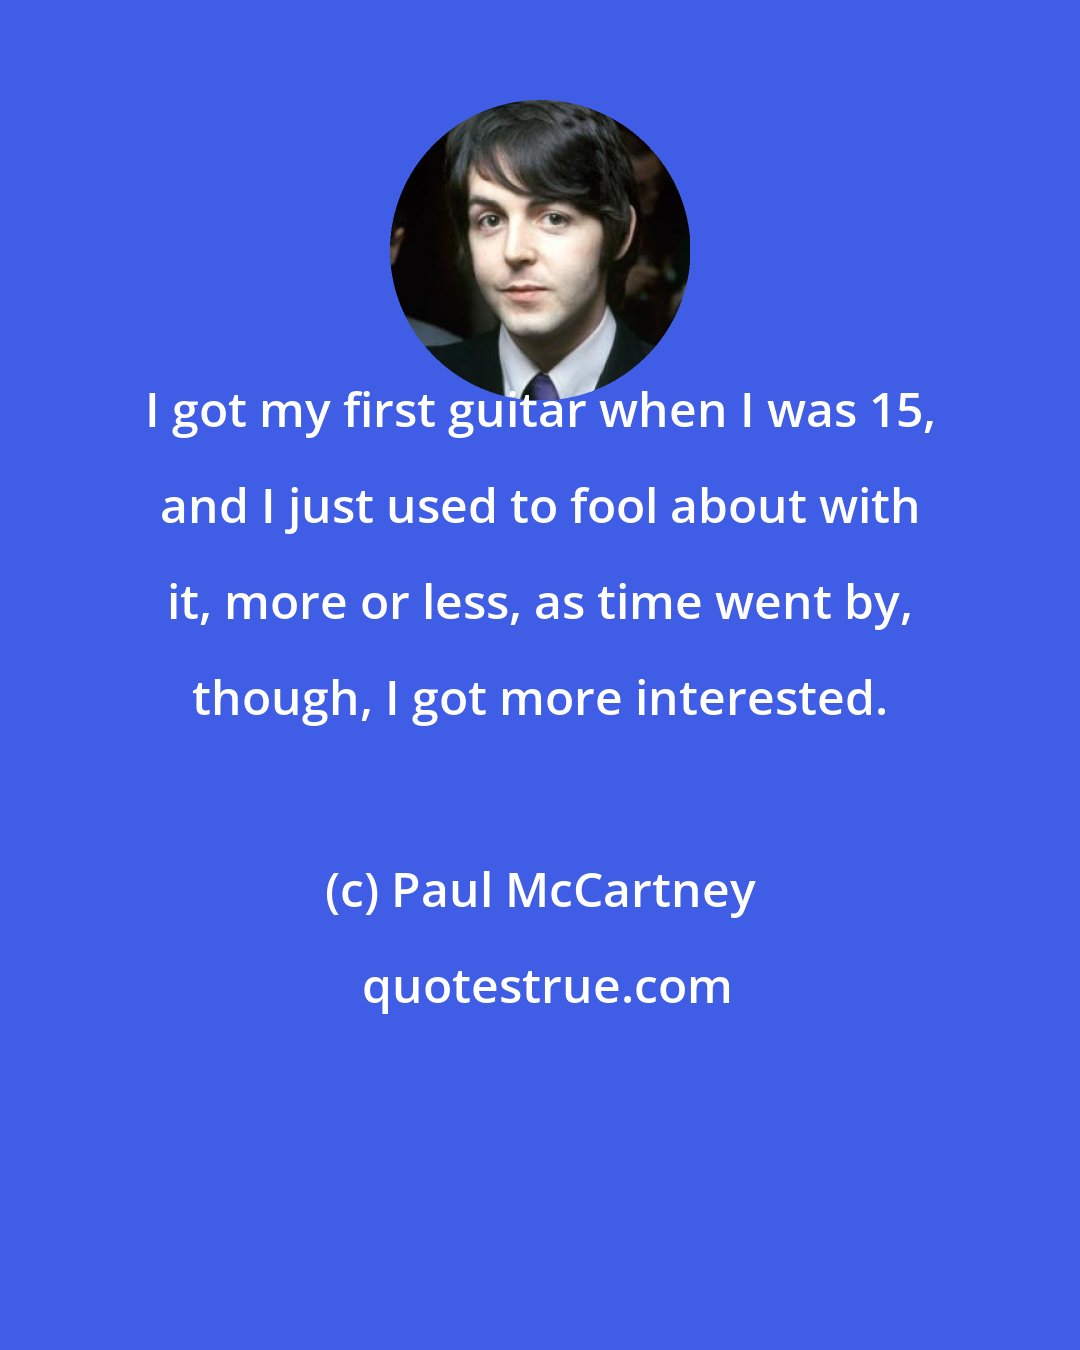 Paul McCartney: I got my first guitar when I was 15, and I just used to fool about with it, more or less, as time went by, though, I got more interested.